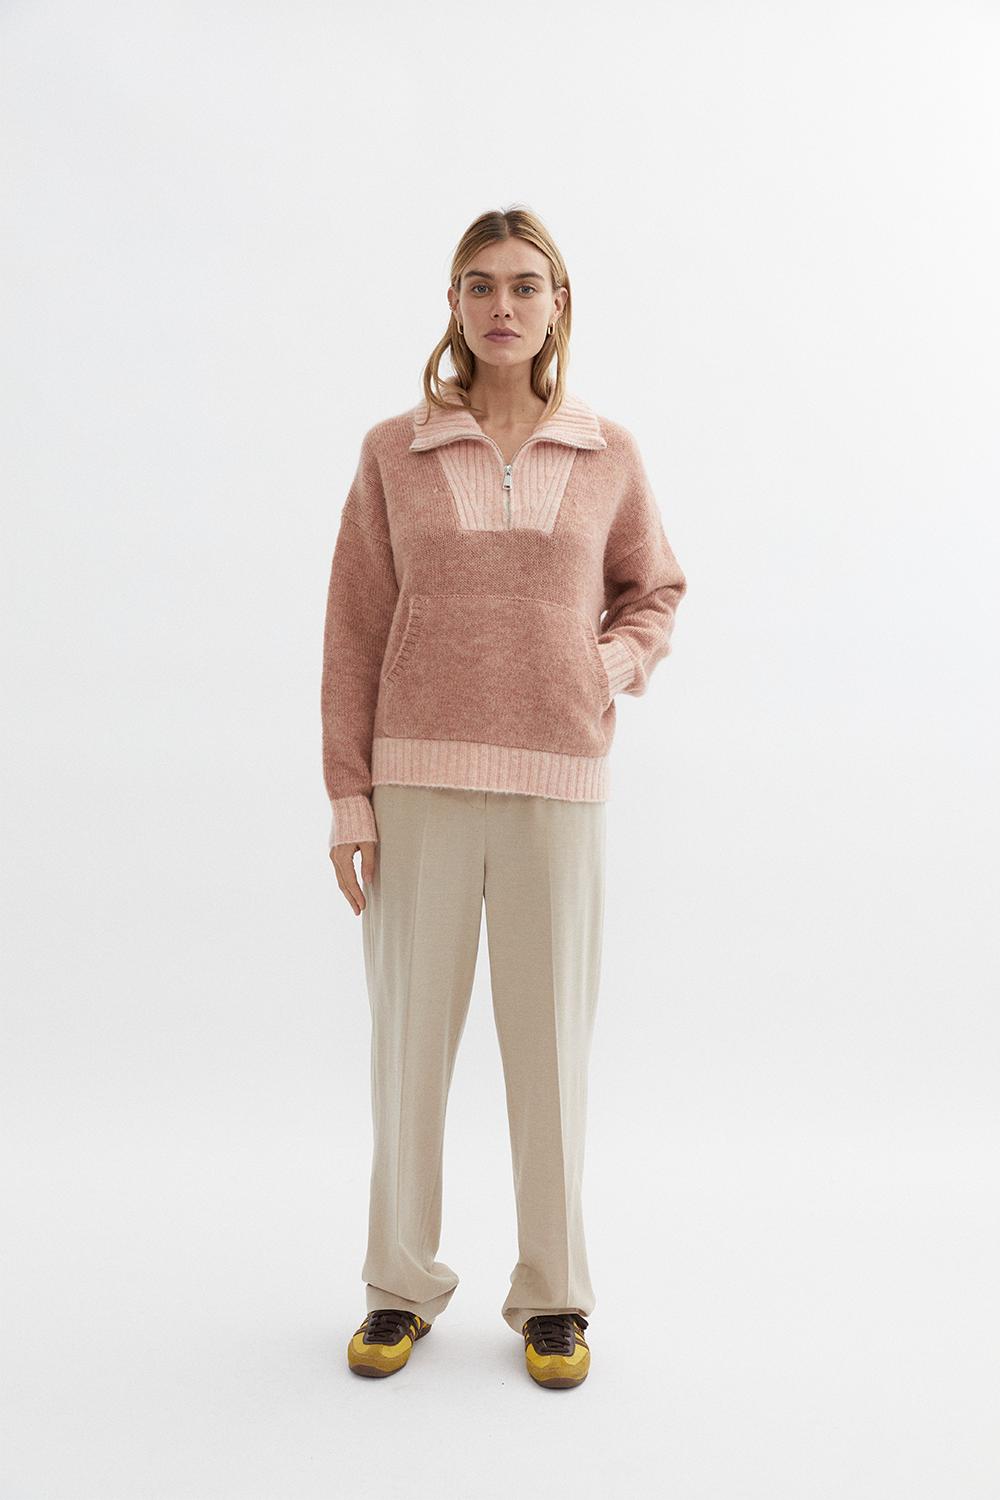 Clementine Knit in Pink - BLANCA